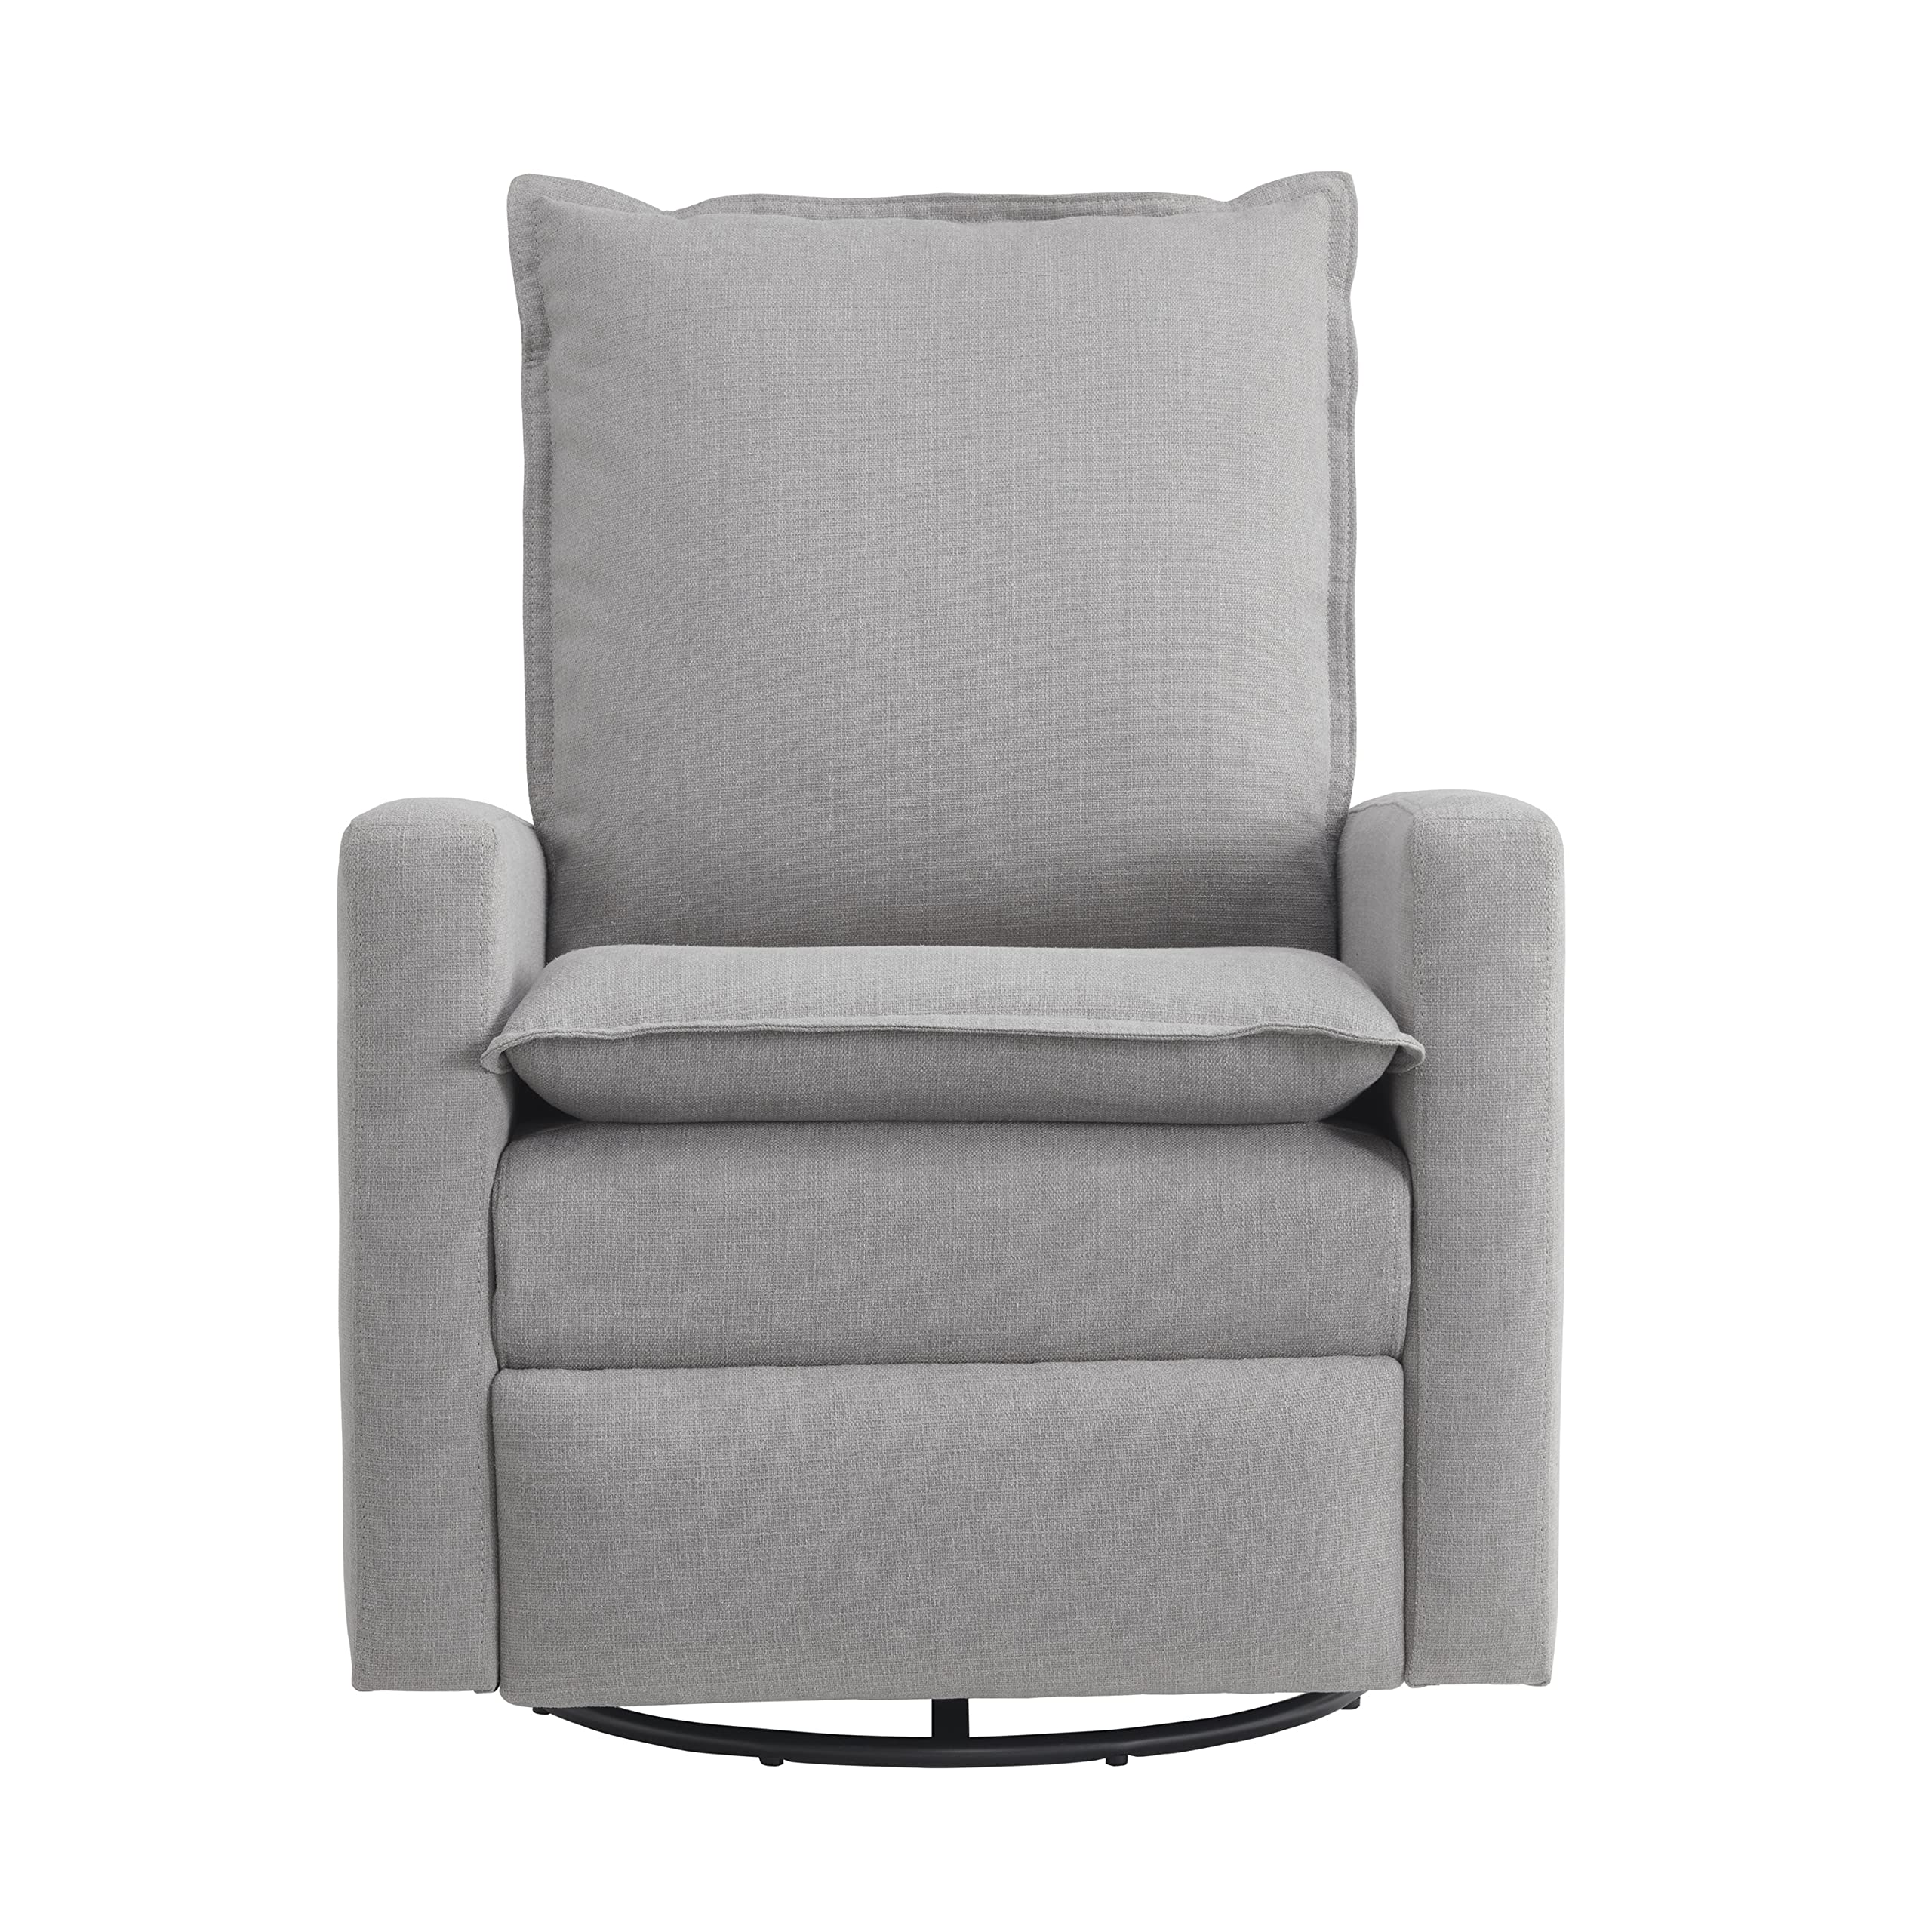 Oxford Baby Uptown Upholstered Swivel Glider and Recliner Nursery Chair, Gray